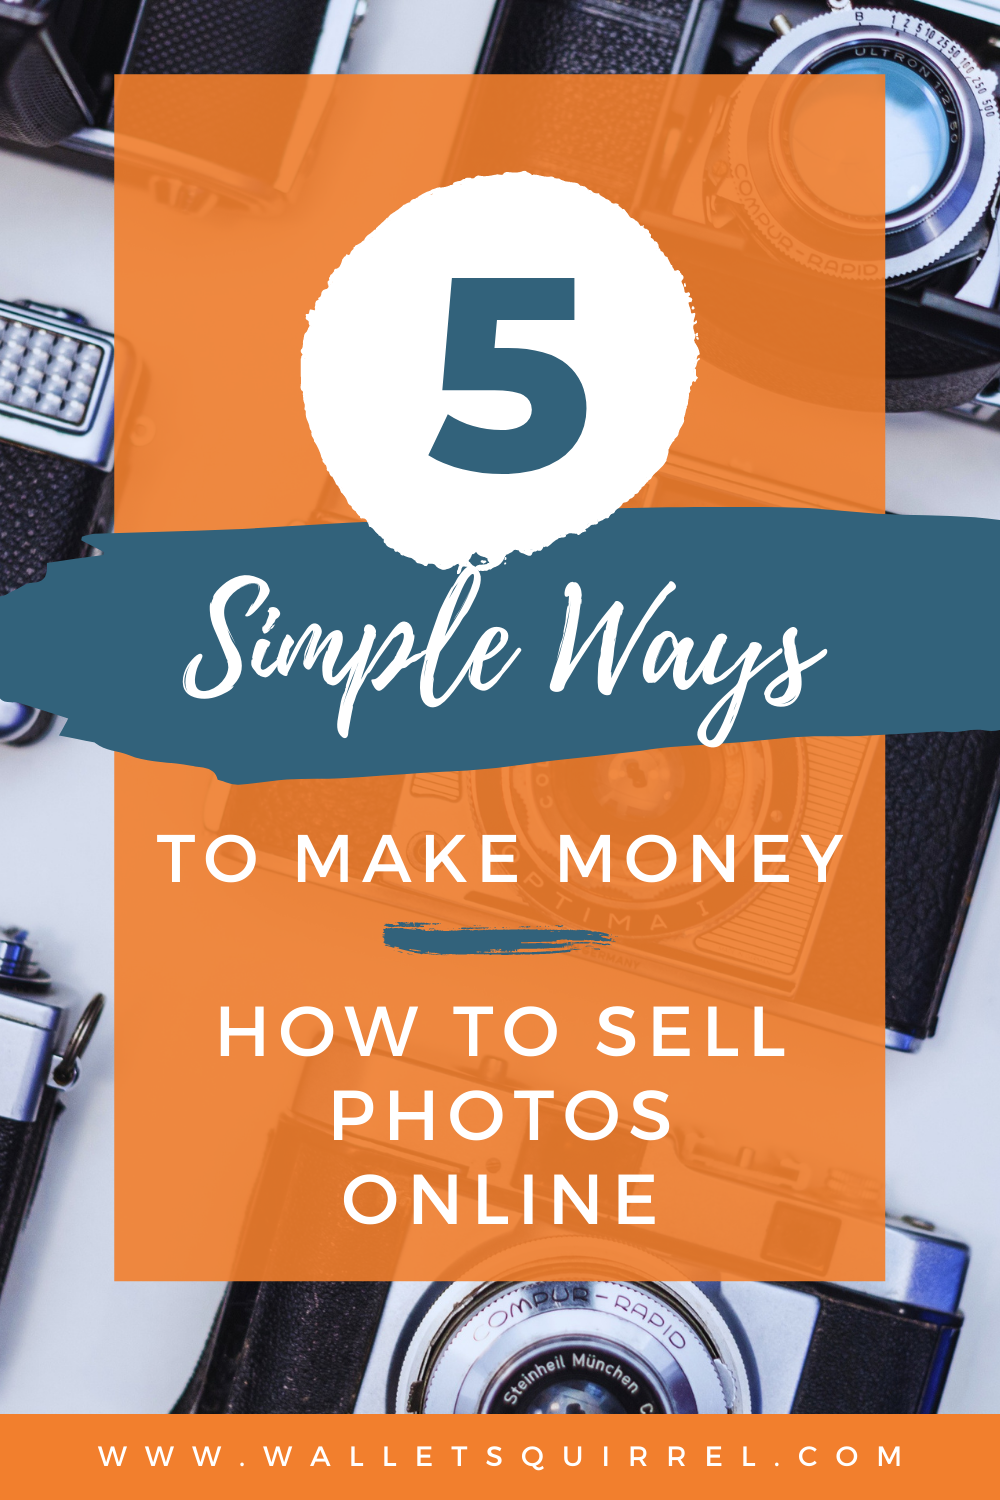 Find five different ways on how to sell photos online. These are all very easy ways for anyone to sell their own photography. #makemoney #financialfreedom #photography